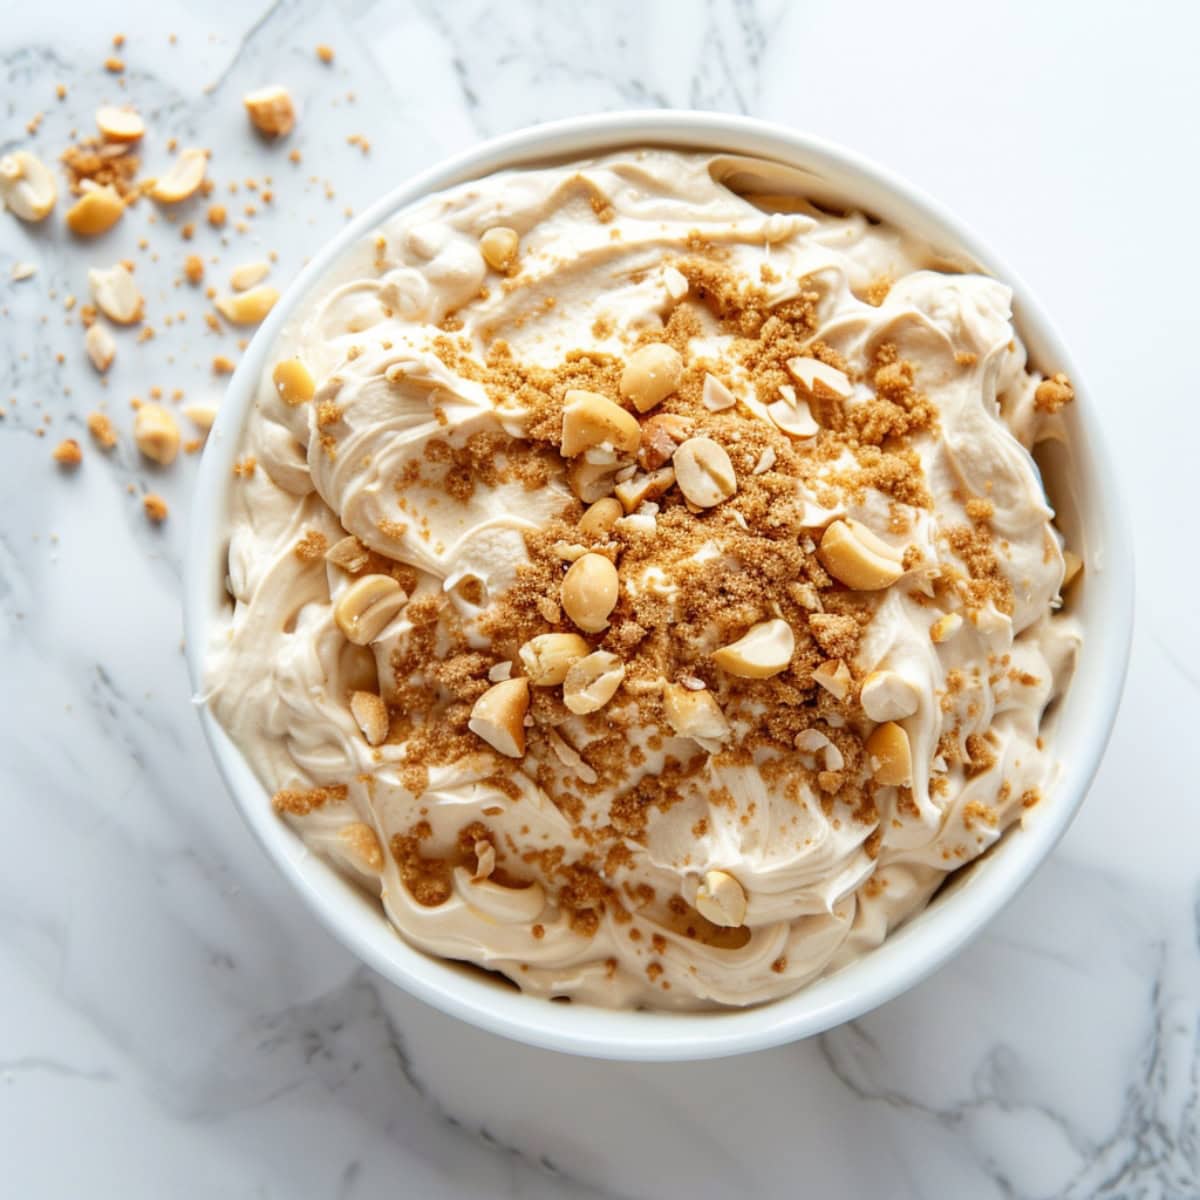 Top view of creamy peanut butter dip in a white bowl.